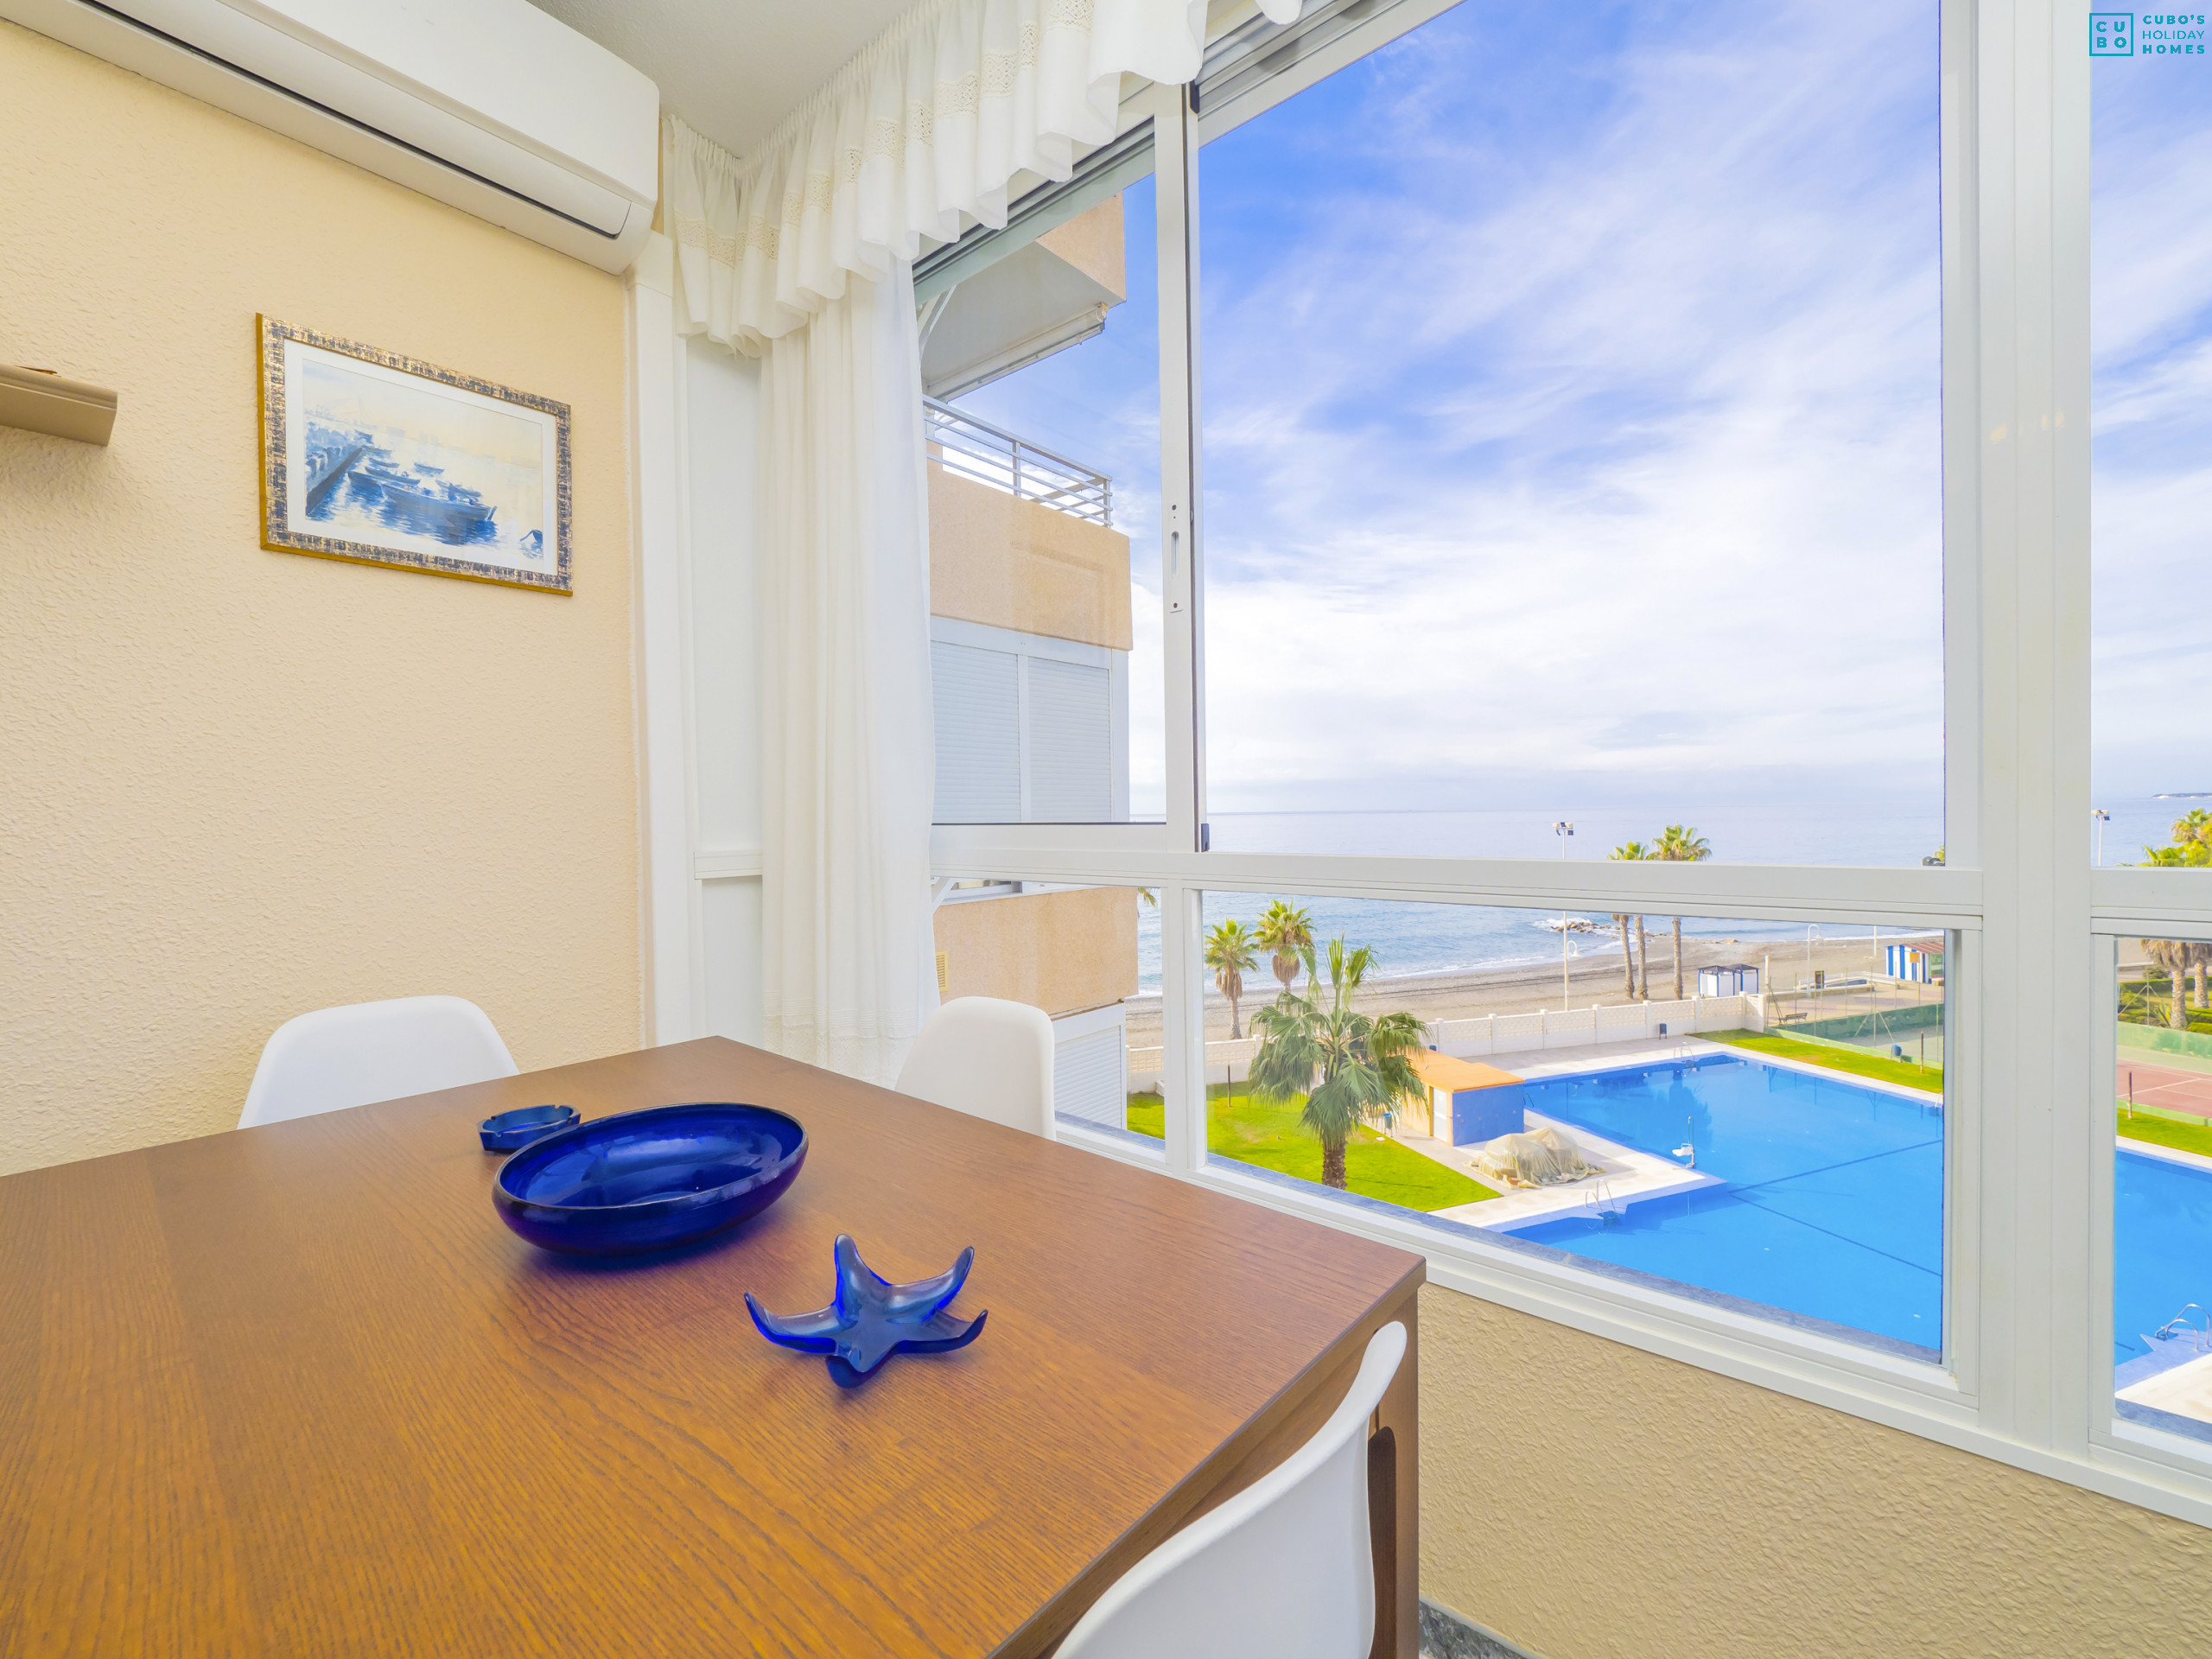 Pool views from this apartment in Algarrobo